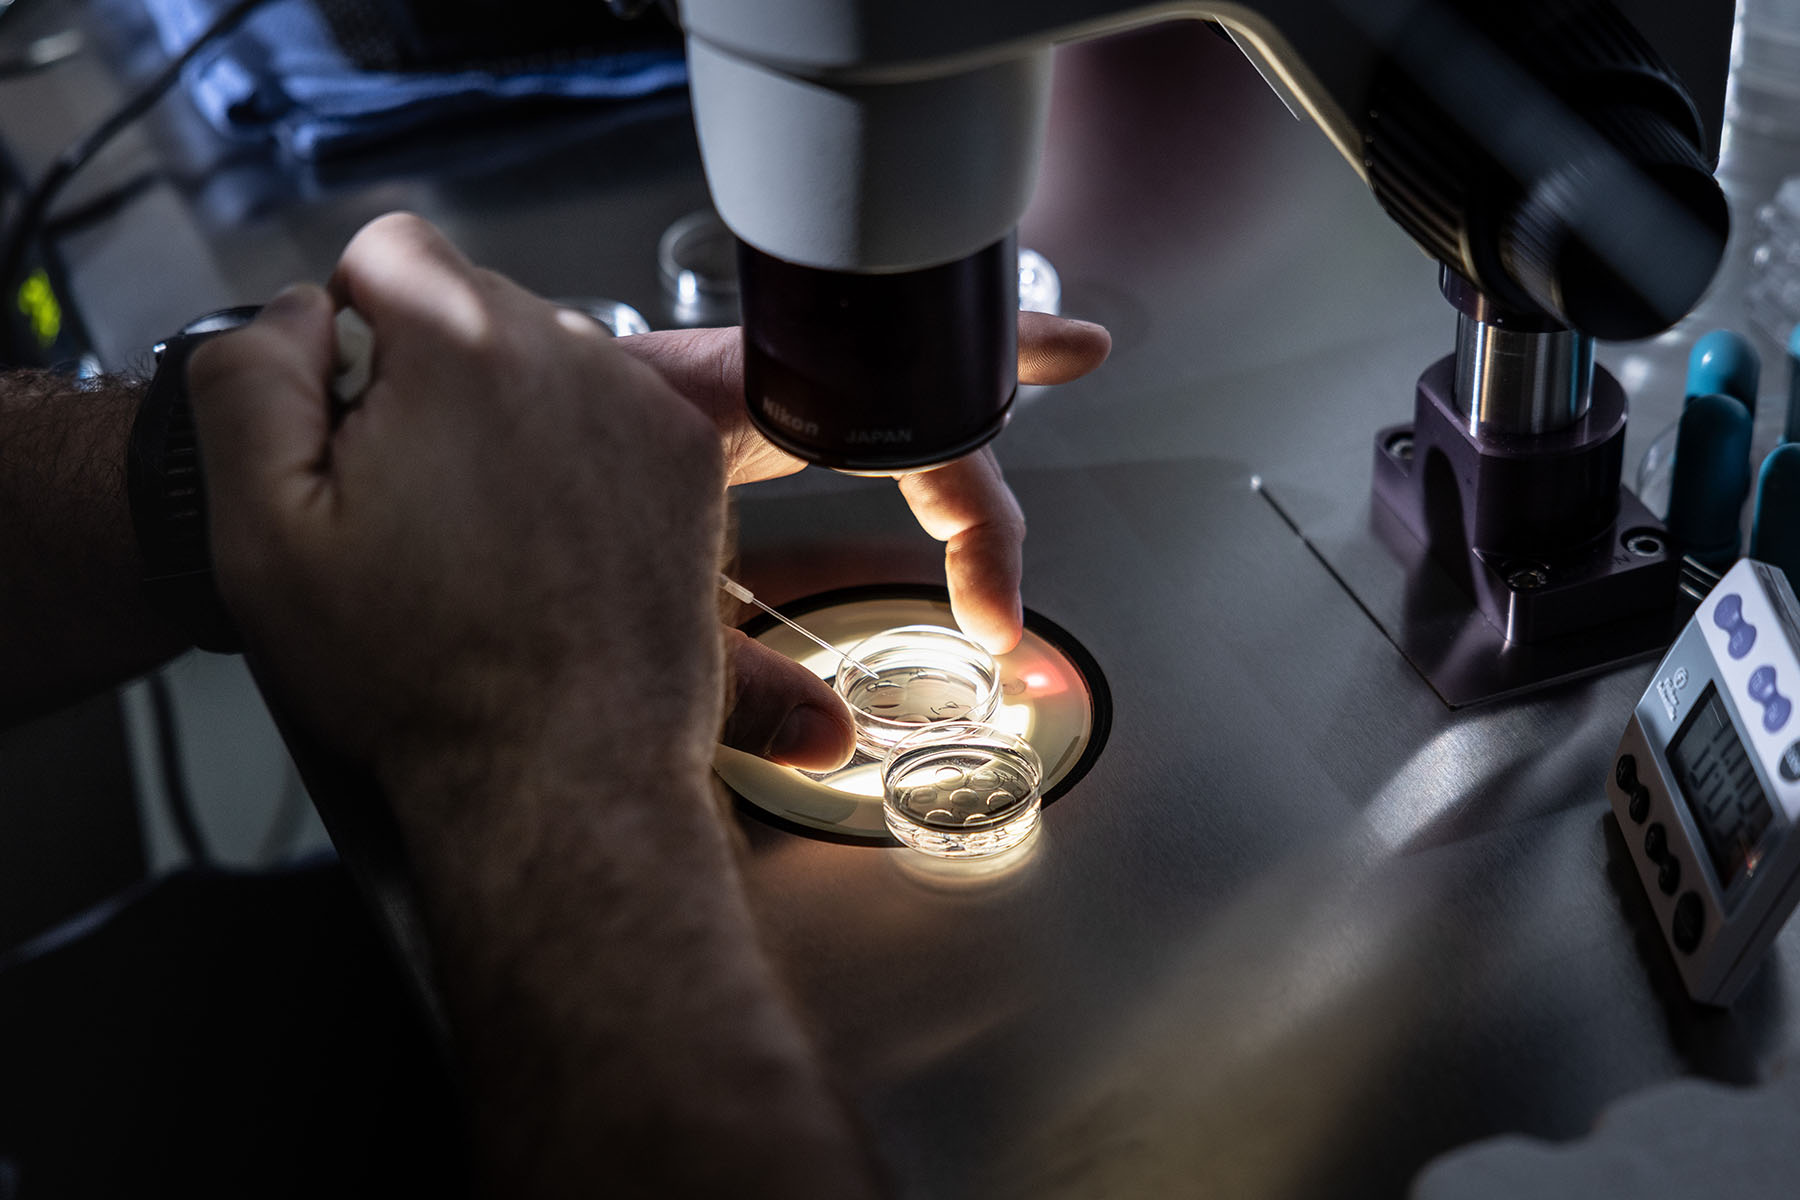 An embryologist adds media to petri dishes containing embryos, before freezing the embryos.